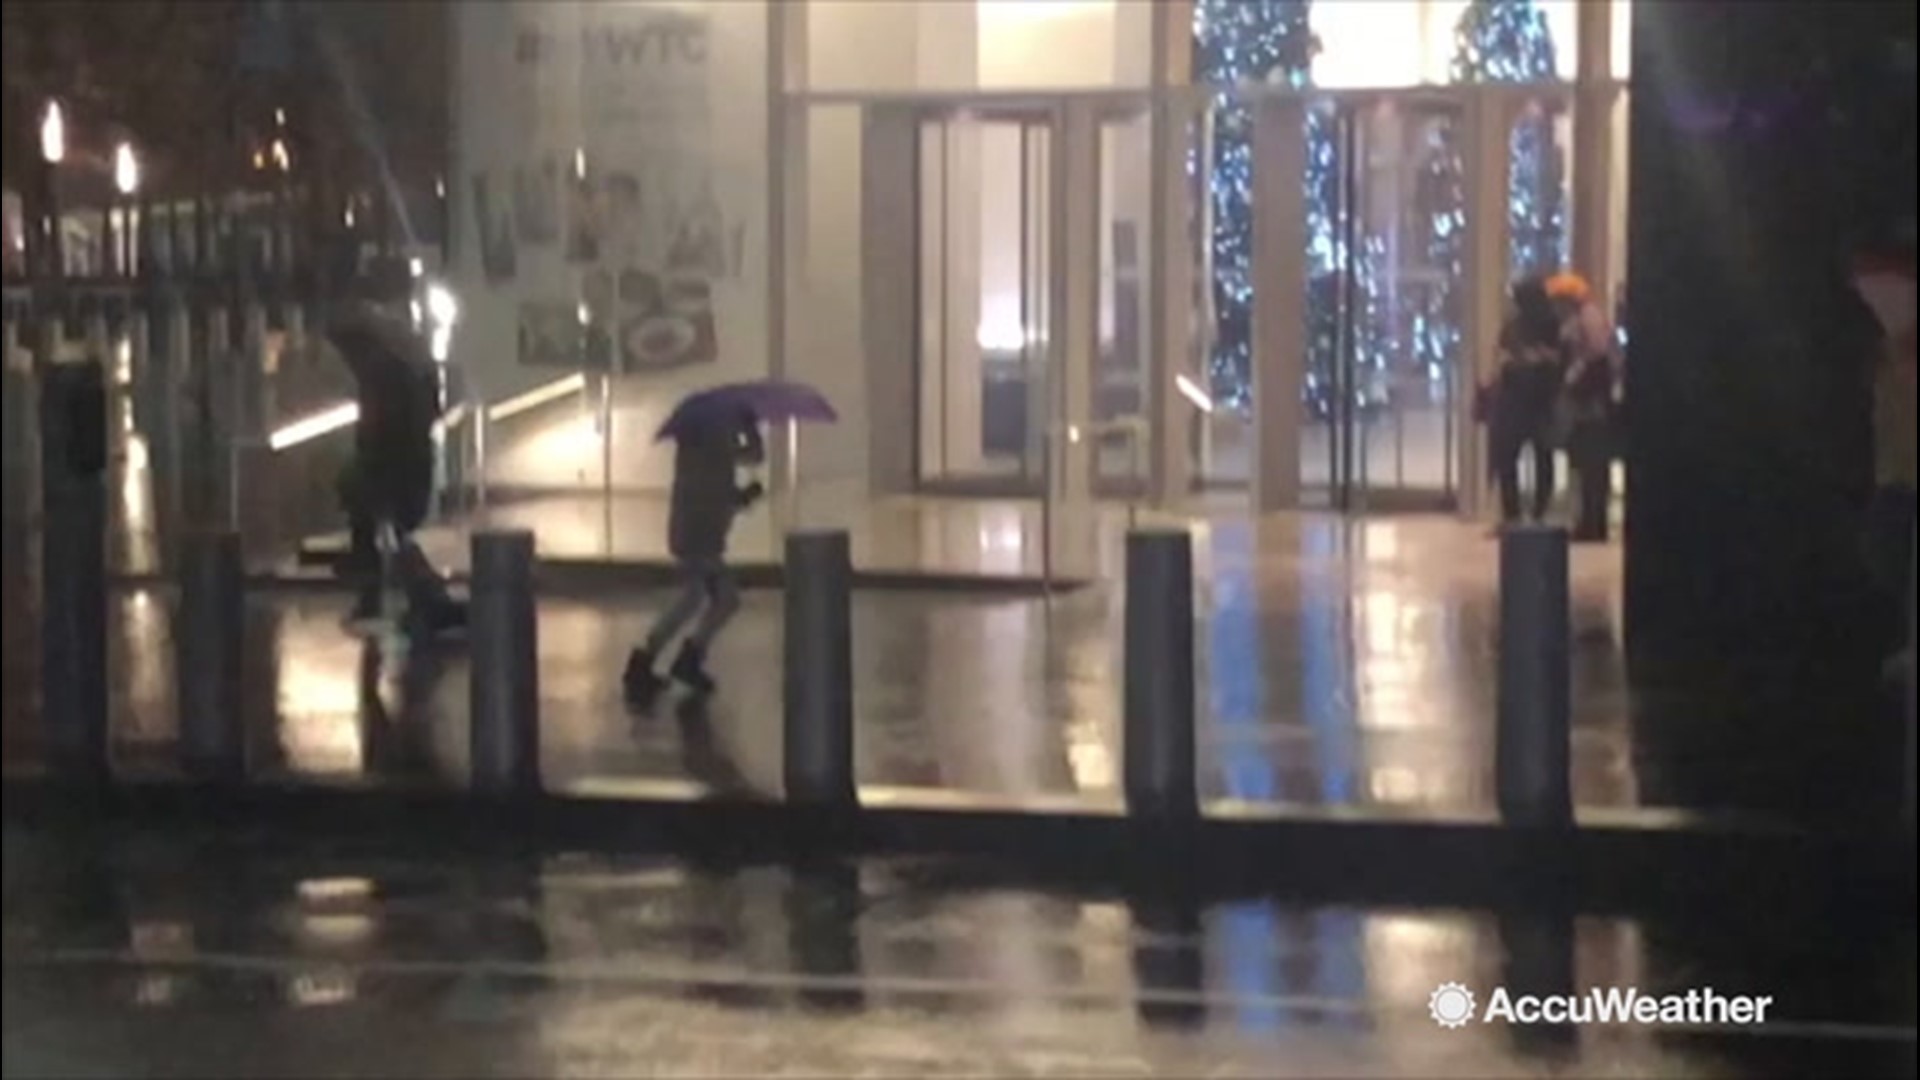 It was a very windy and rainy night in New York City on Sunday, Dec. 1.